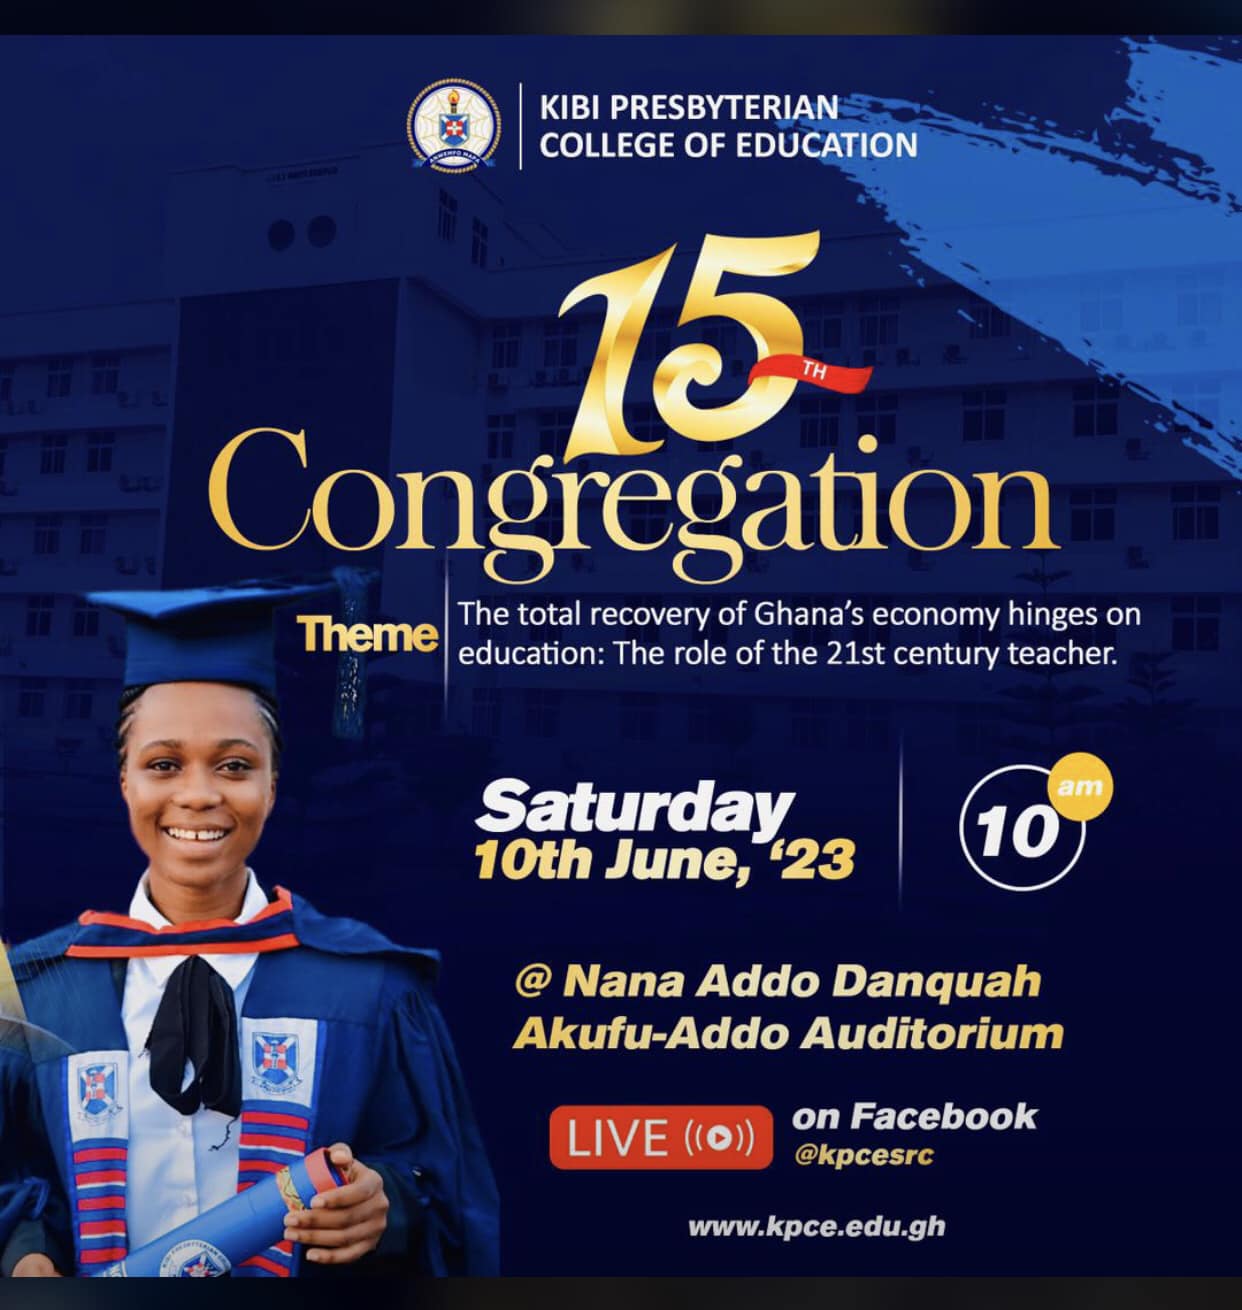 Akuffo Addo joins Kibi College of Education's 15th Congregation on June 10 | 1